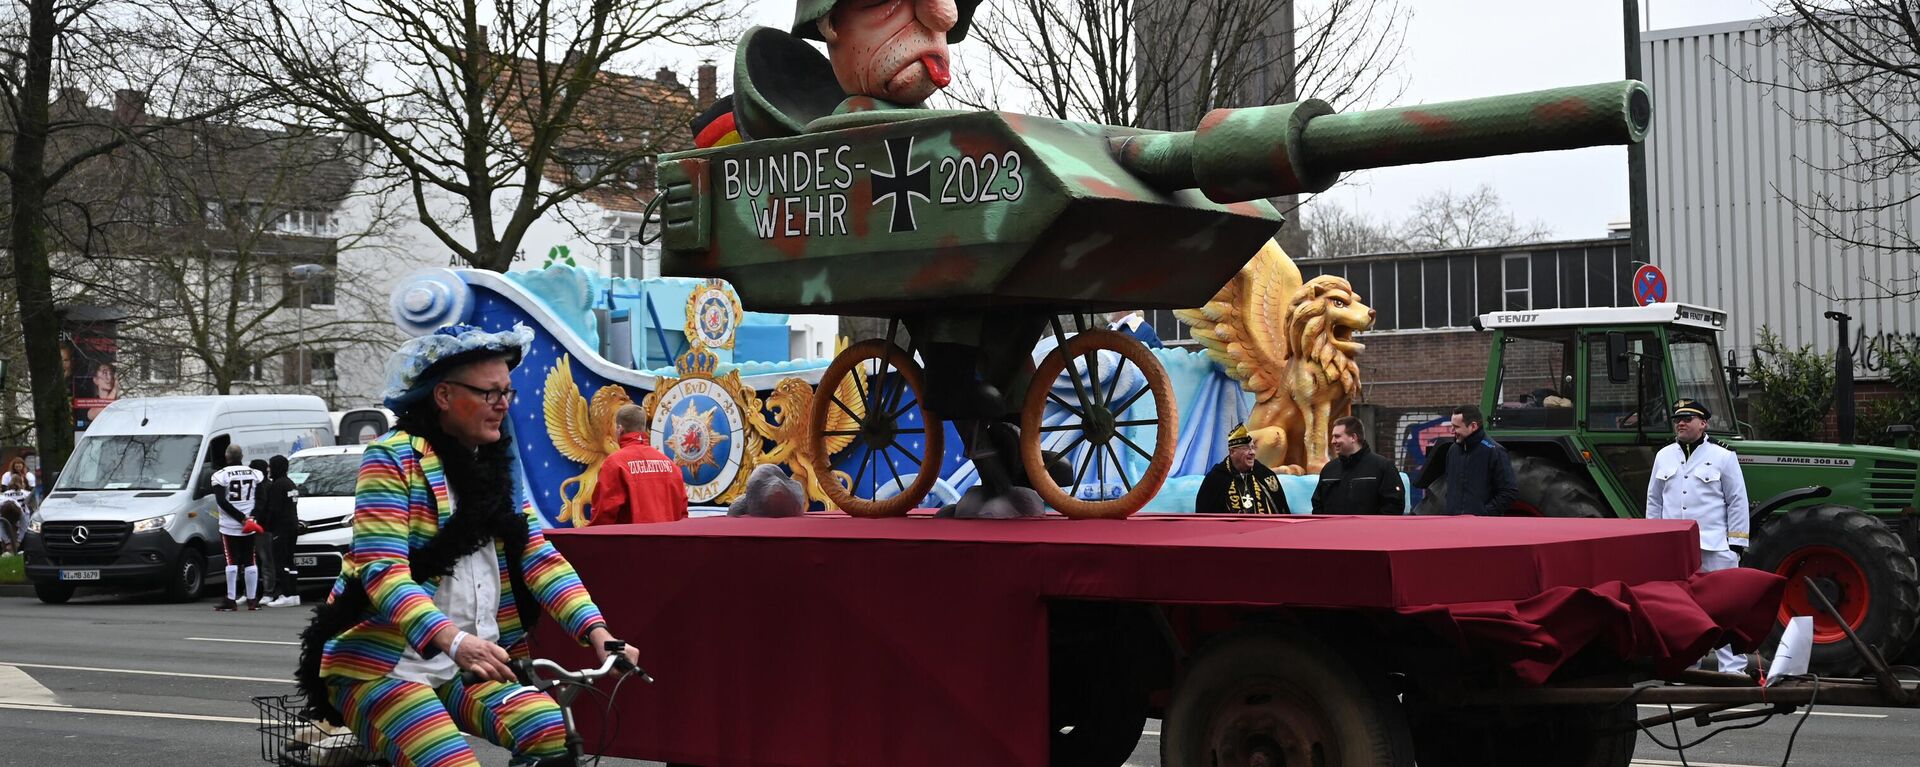 A carnival float mocks the current condition of the German armed Forces military equipment during a Rose Monday street carnival parade in Duesseldorf, western Germany, on February 20, 2023. - Sputnik International, 1920, 25.09.2023